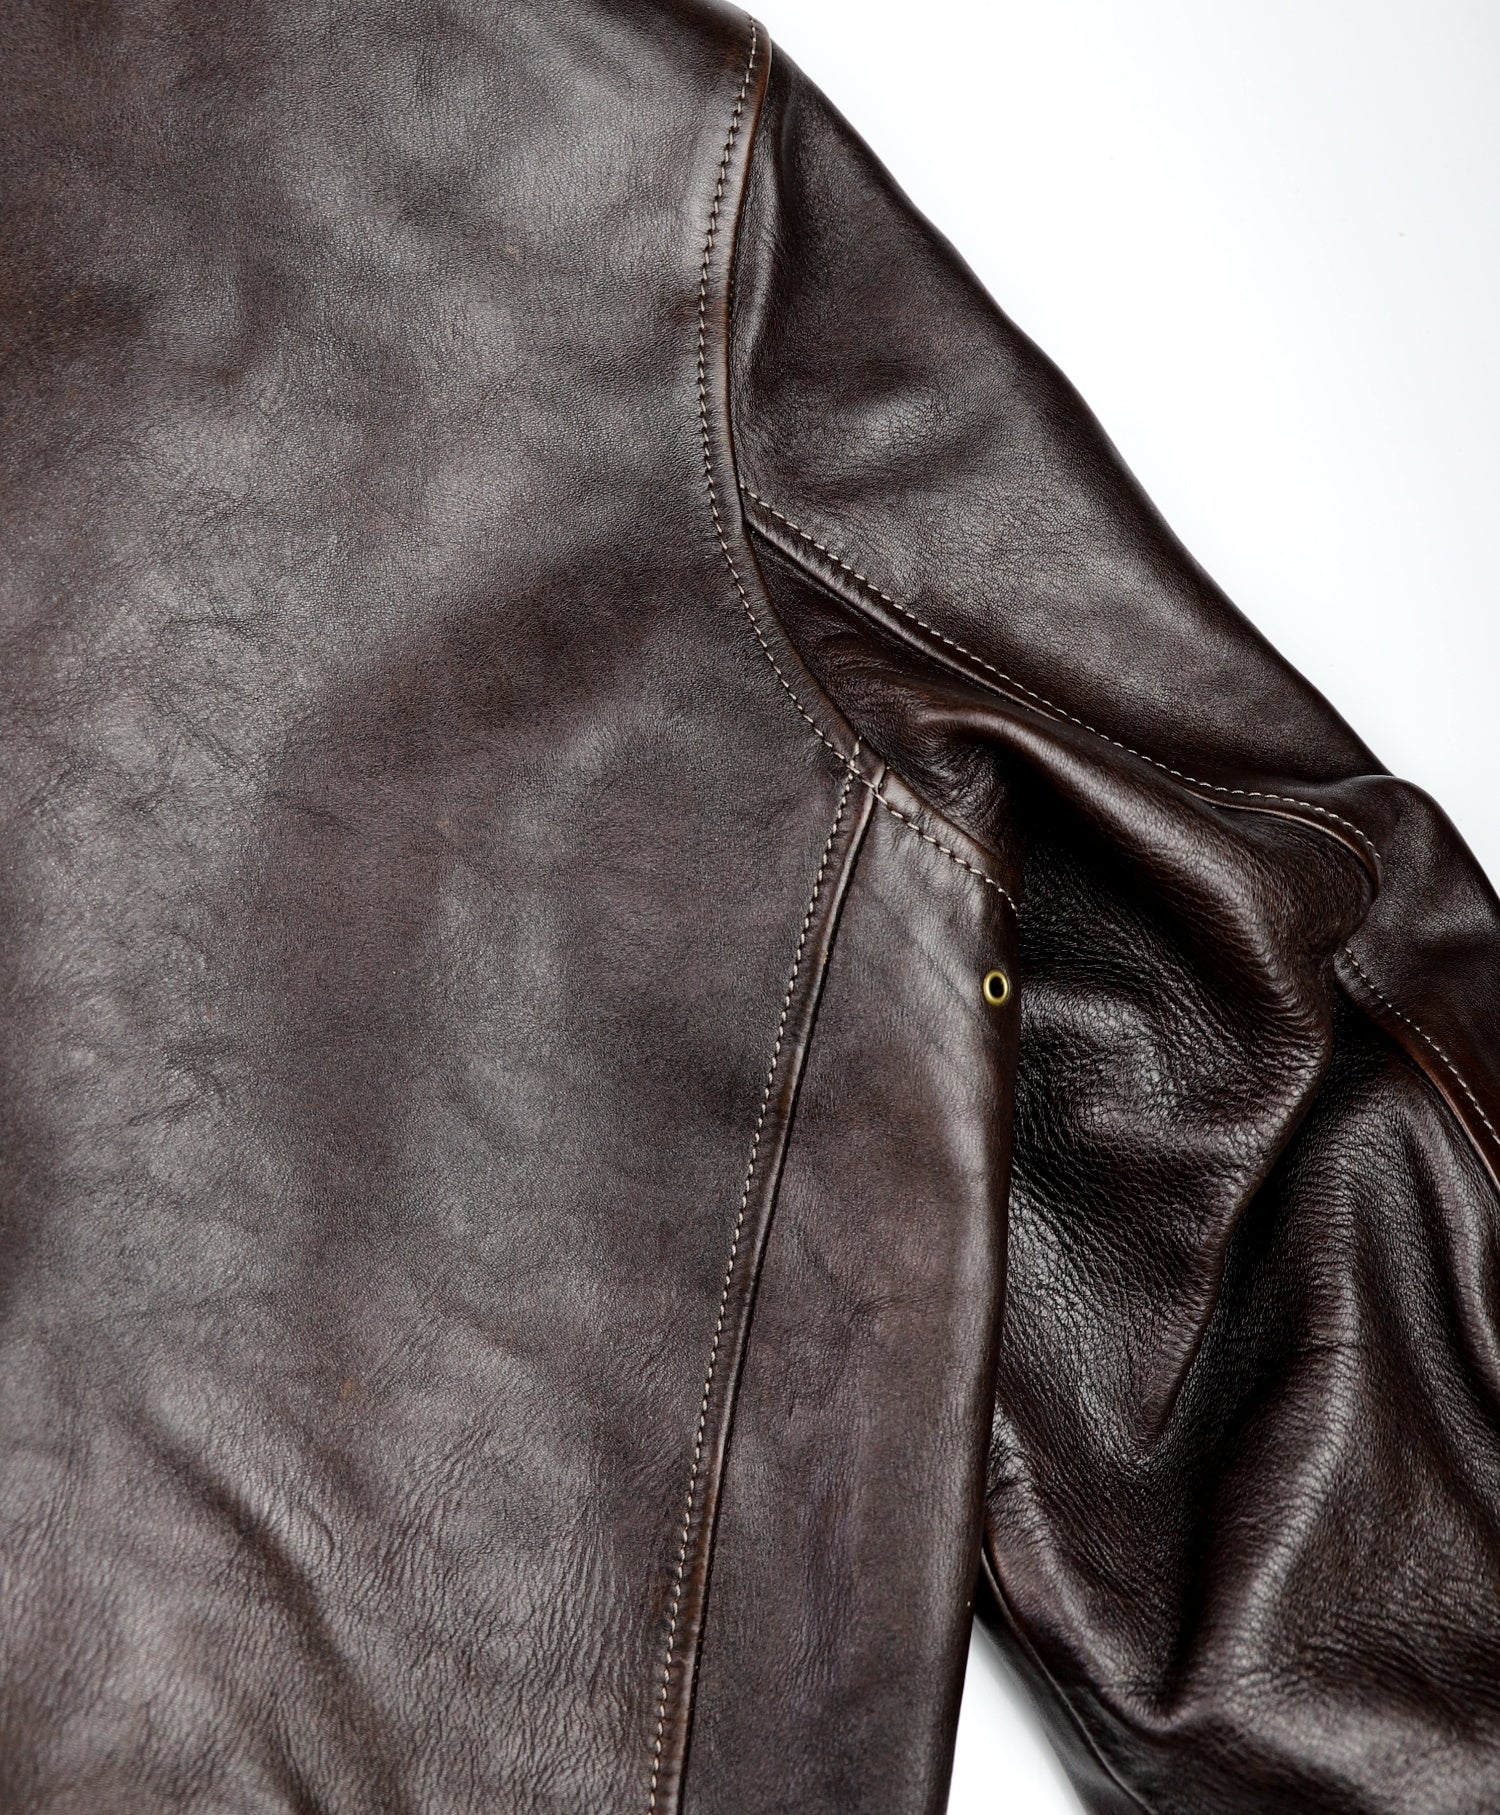 Thedi Idas Jacket, size XL, Chestnut Bruciato Horsehide with Shearling Collar